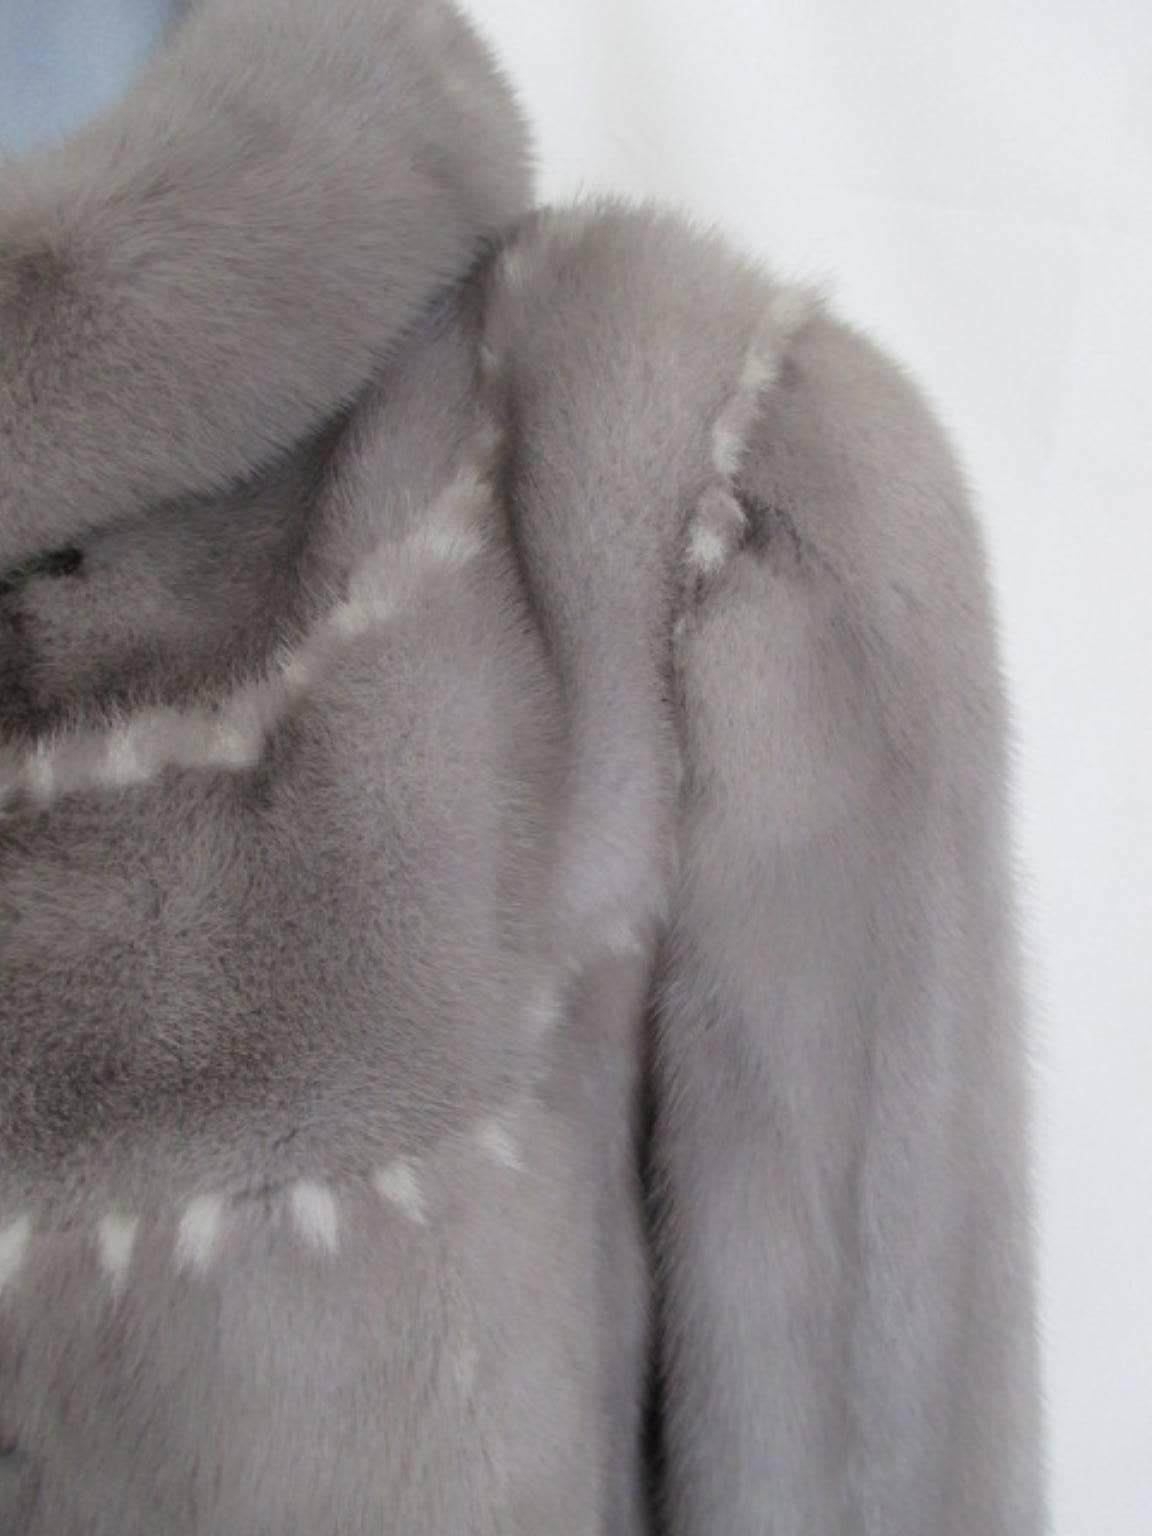 This fur jacket is made of very soft top quality sapphire mink made by saga mink (Saga furs, superior fur products)

We offer more exclusive fur items, view our frontstore

Details:
Sapphire Mink is a light grey mink. Production volume is medium and